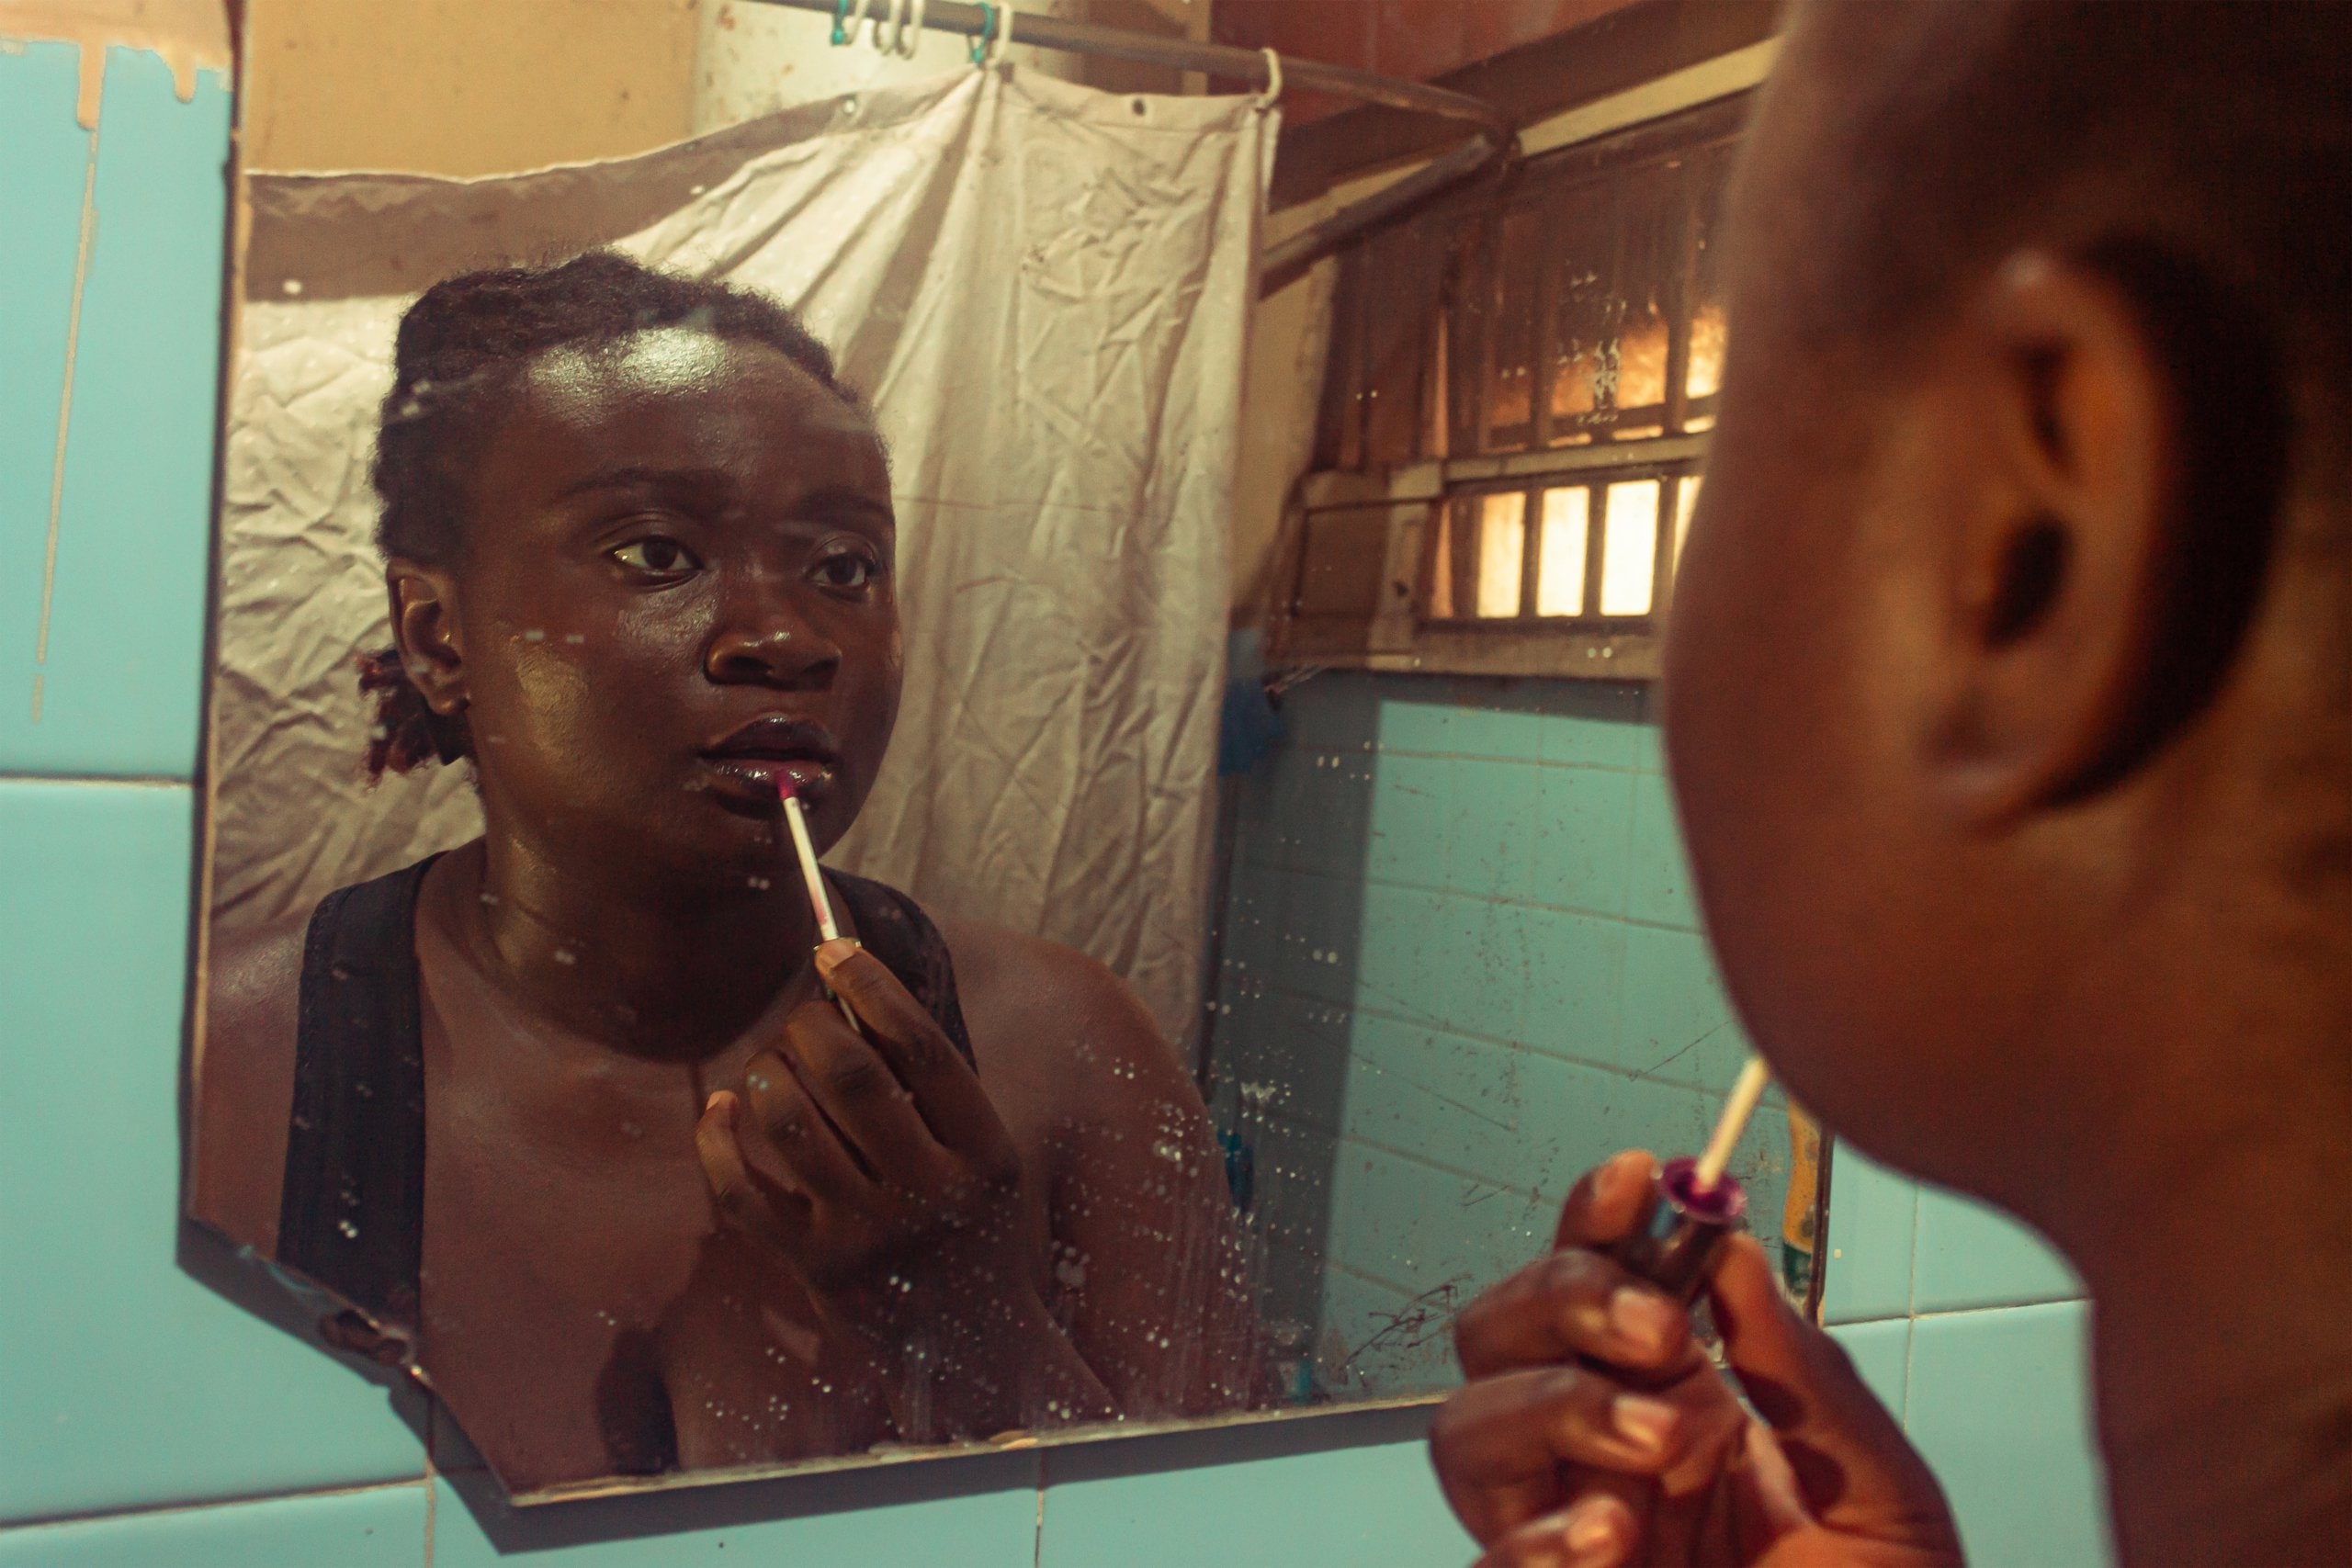 Ife putting on lip-gloss looking in the bathroom mirror.